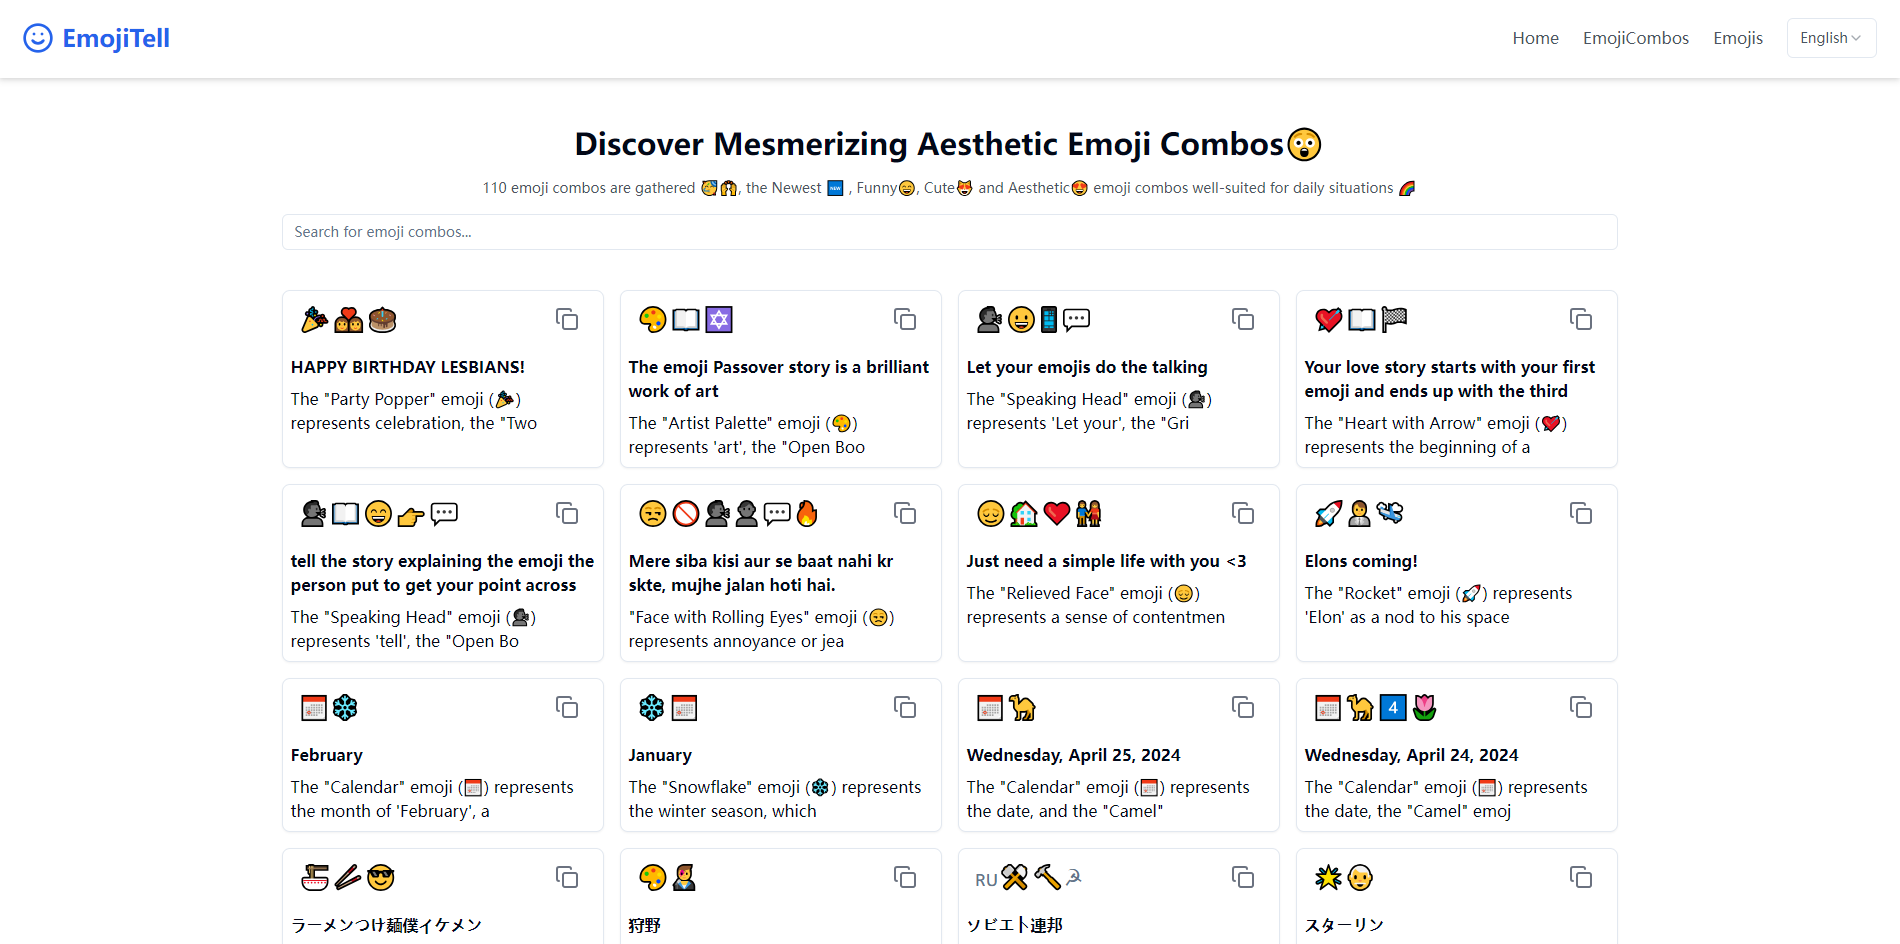 emojitell - Translate text into fun and expressive emoji combos.